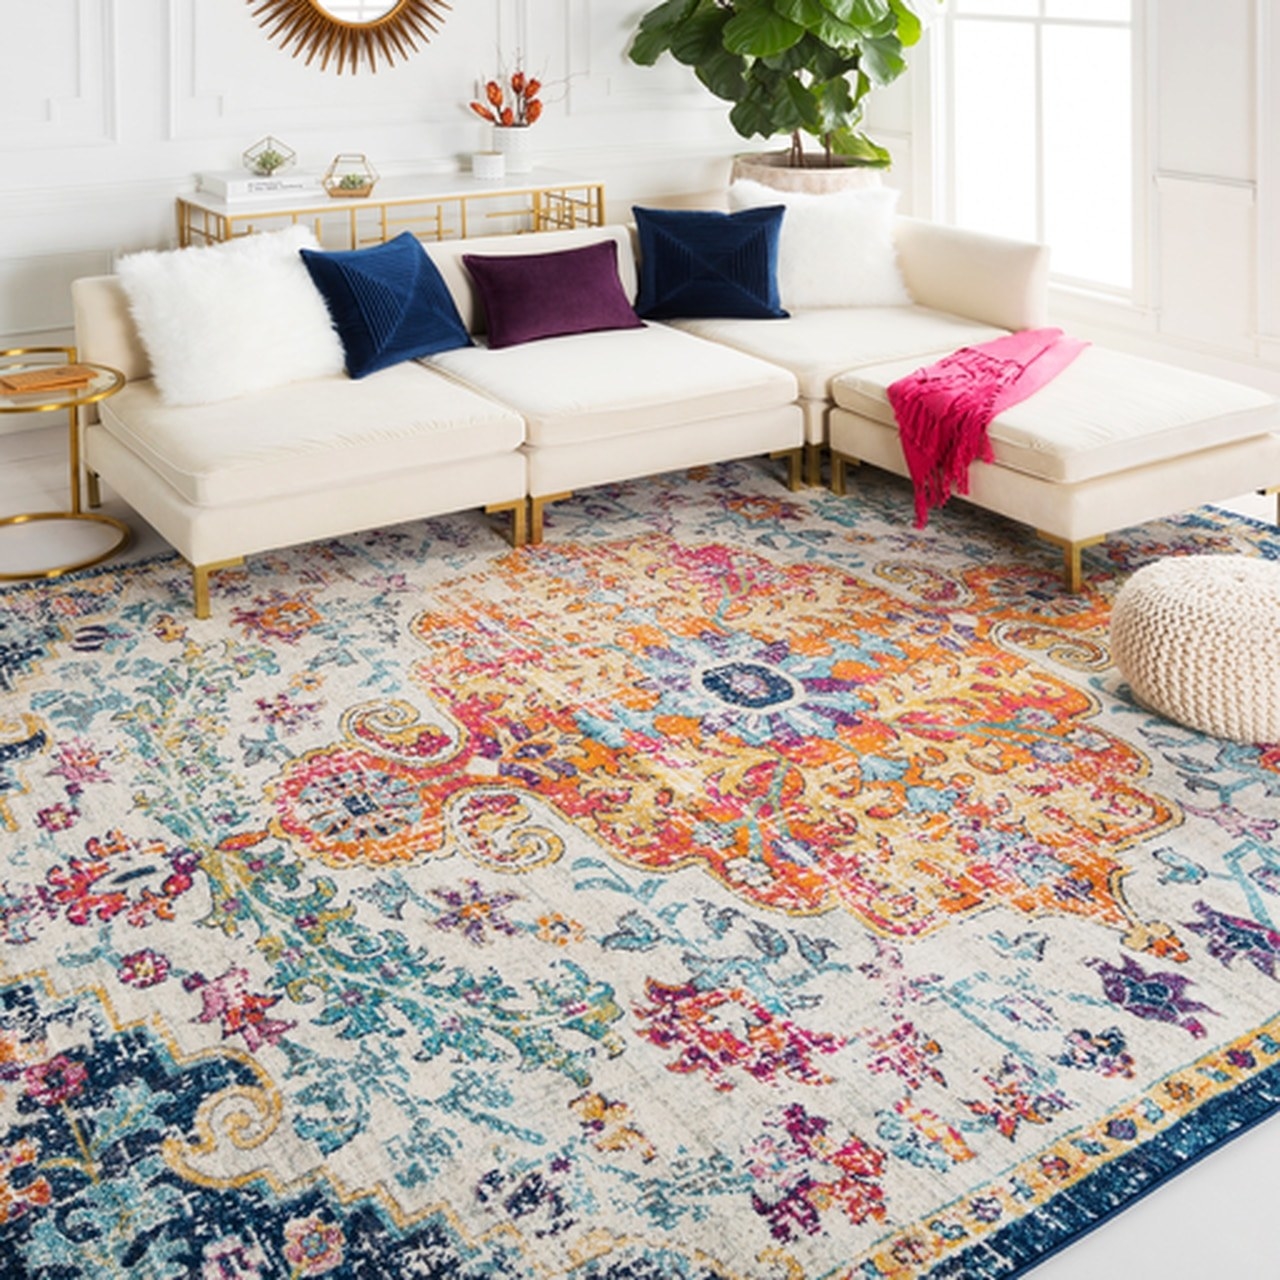 Colorful faux-faded area rug with floral patterns